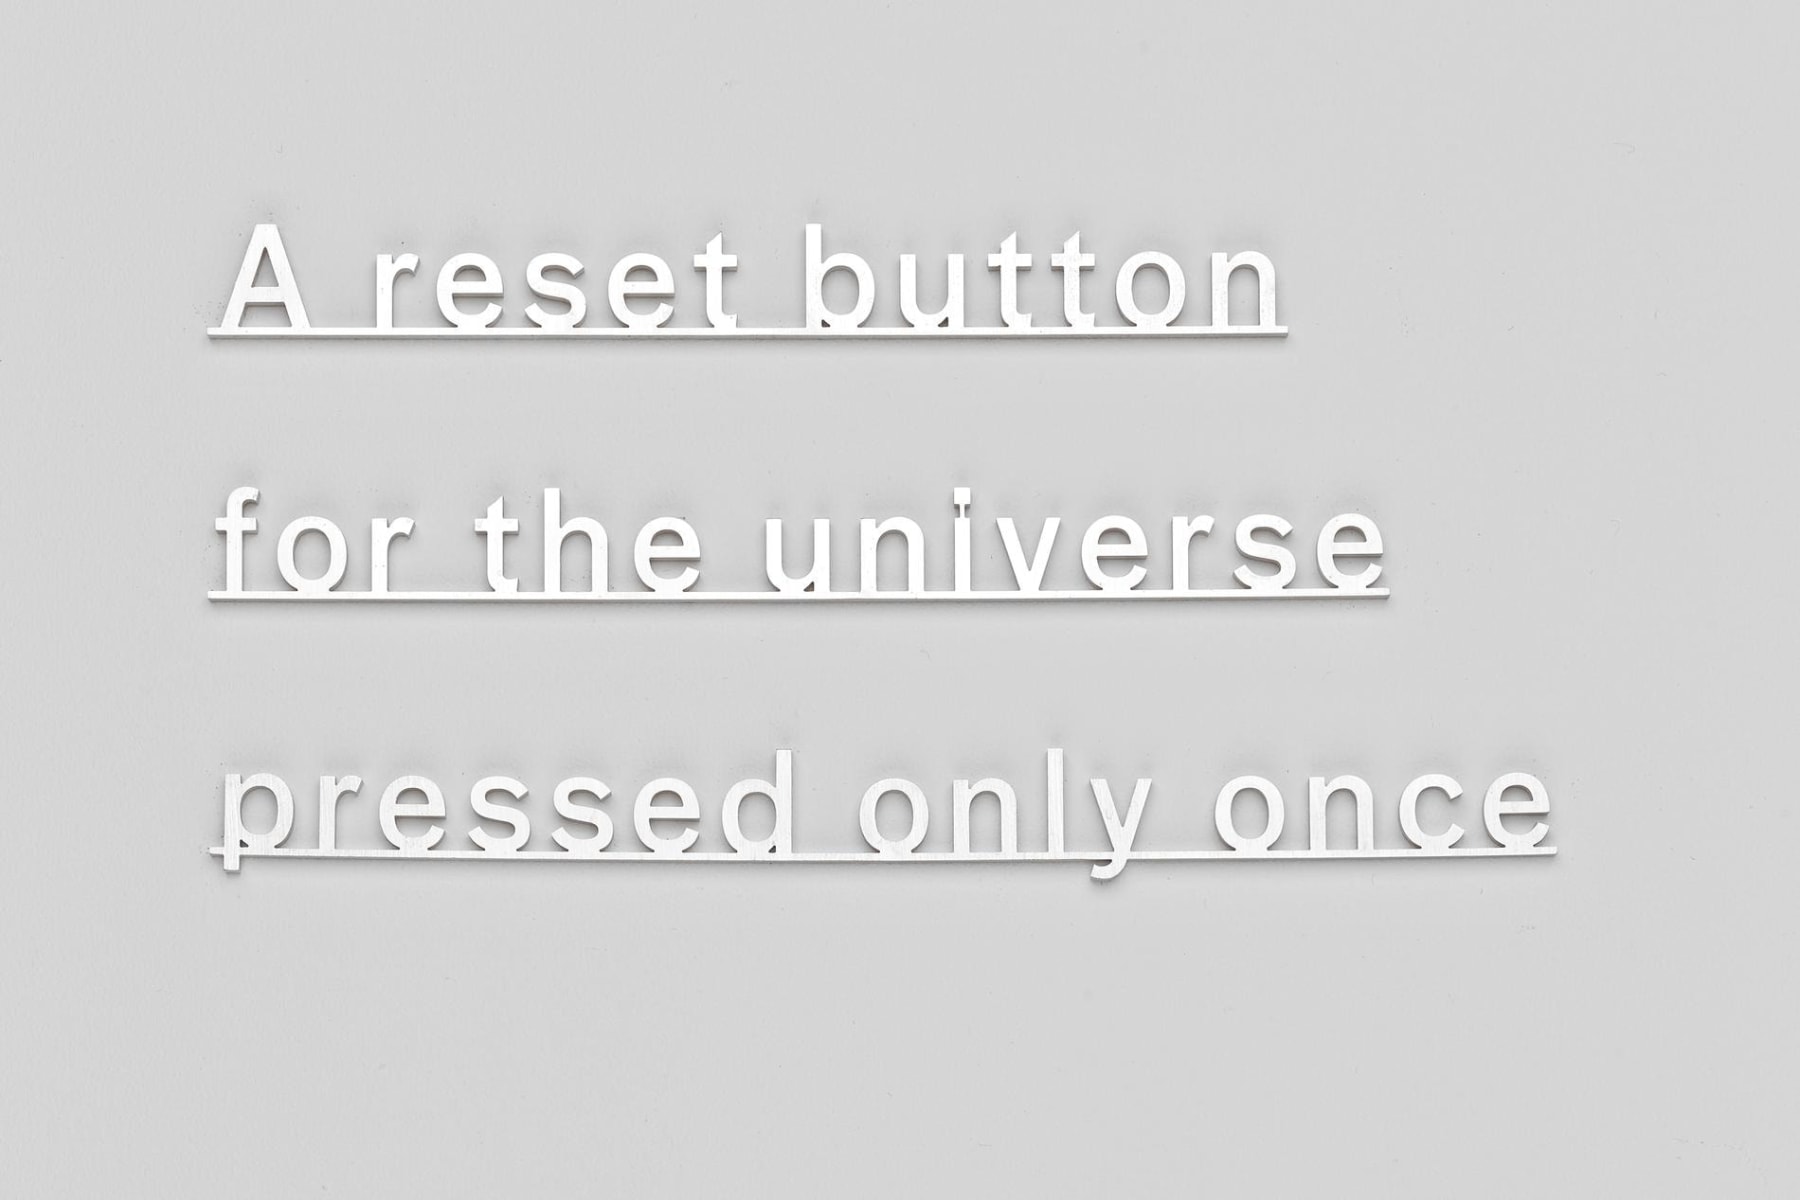 Image of KATIE PATERSON's A reset button for the universe pressed only once, 2015